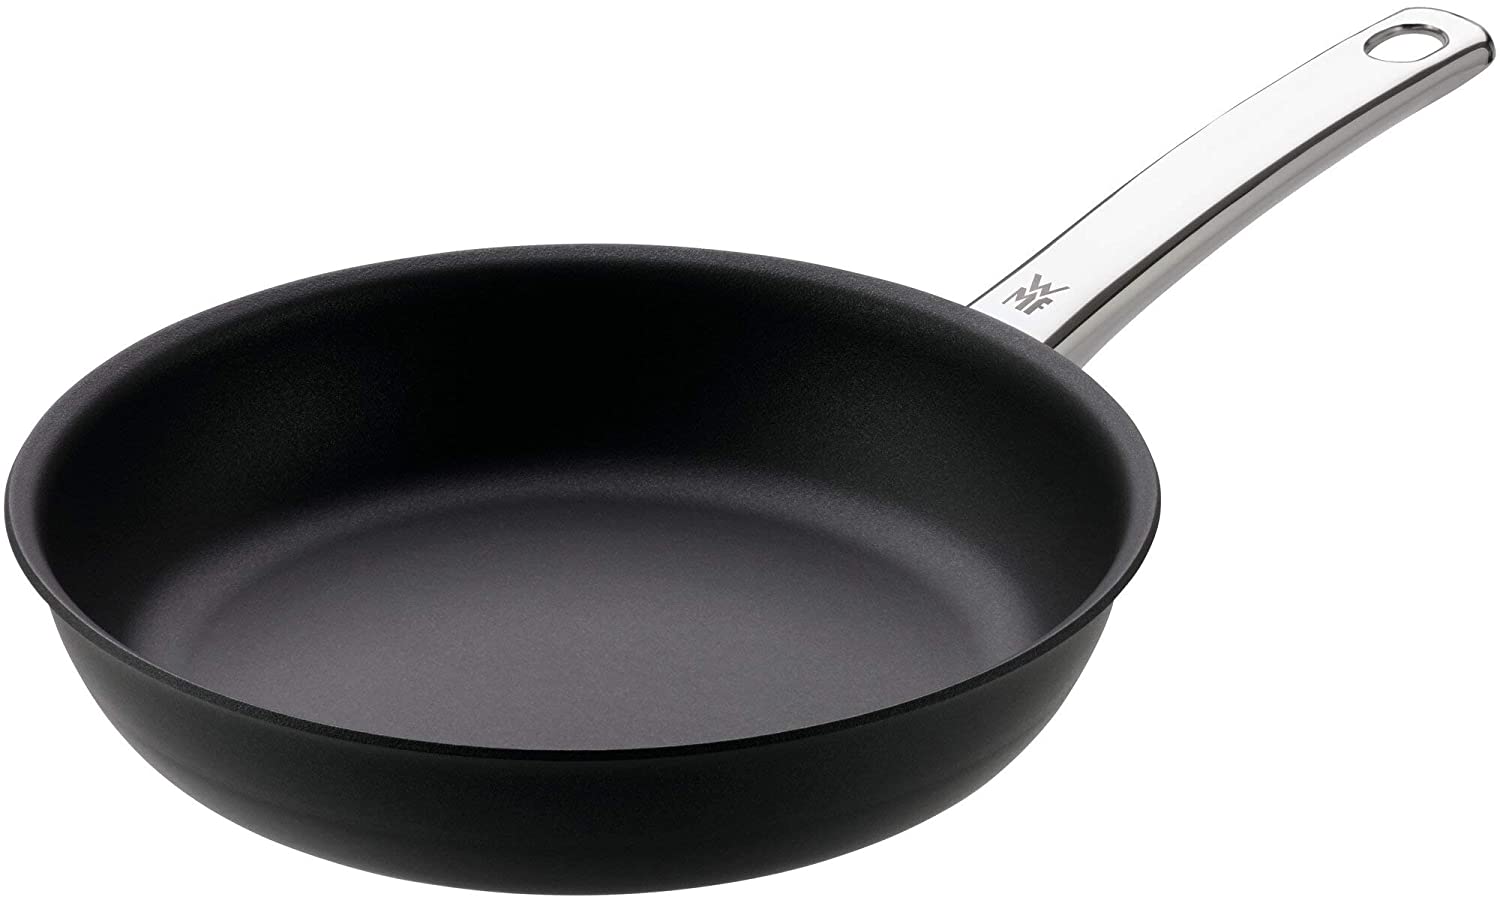 WMF Steak Professional Frying Pan 24 cm Induction, Steak Pan Ideal for Sharp Searing, Multi-Layer Material, Rapid Heat Control, Grill Pan Coated